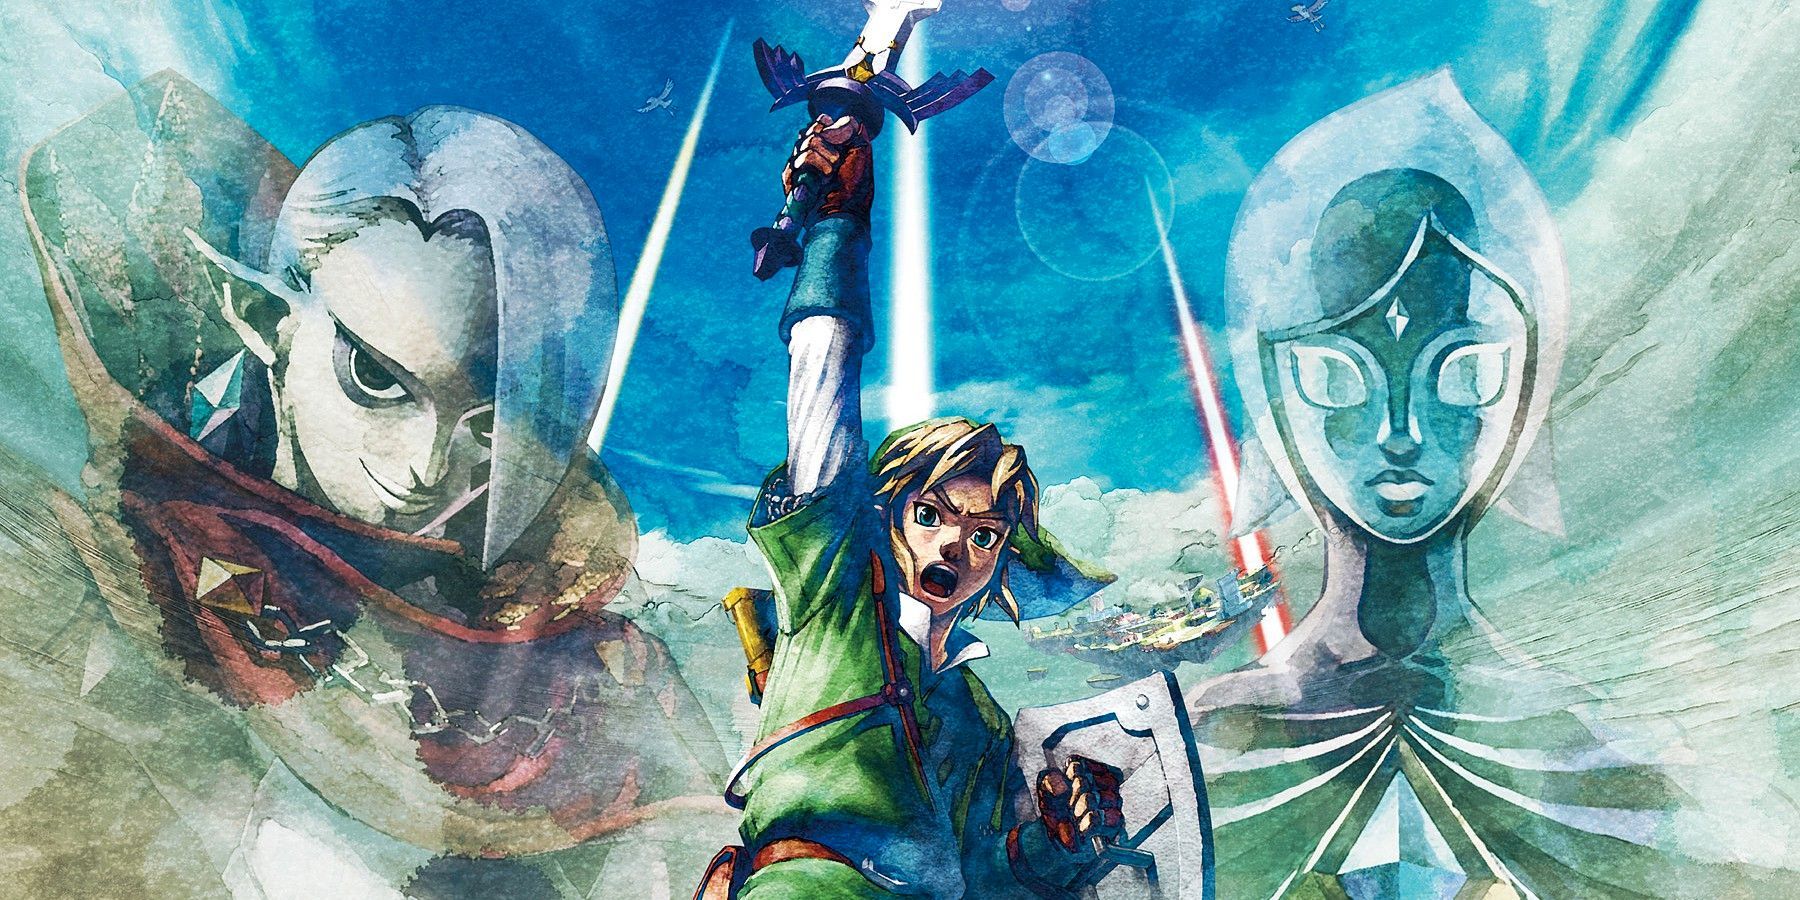 Link raising the master sword with Fi and Ghirahim in the background